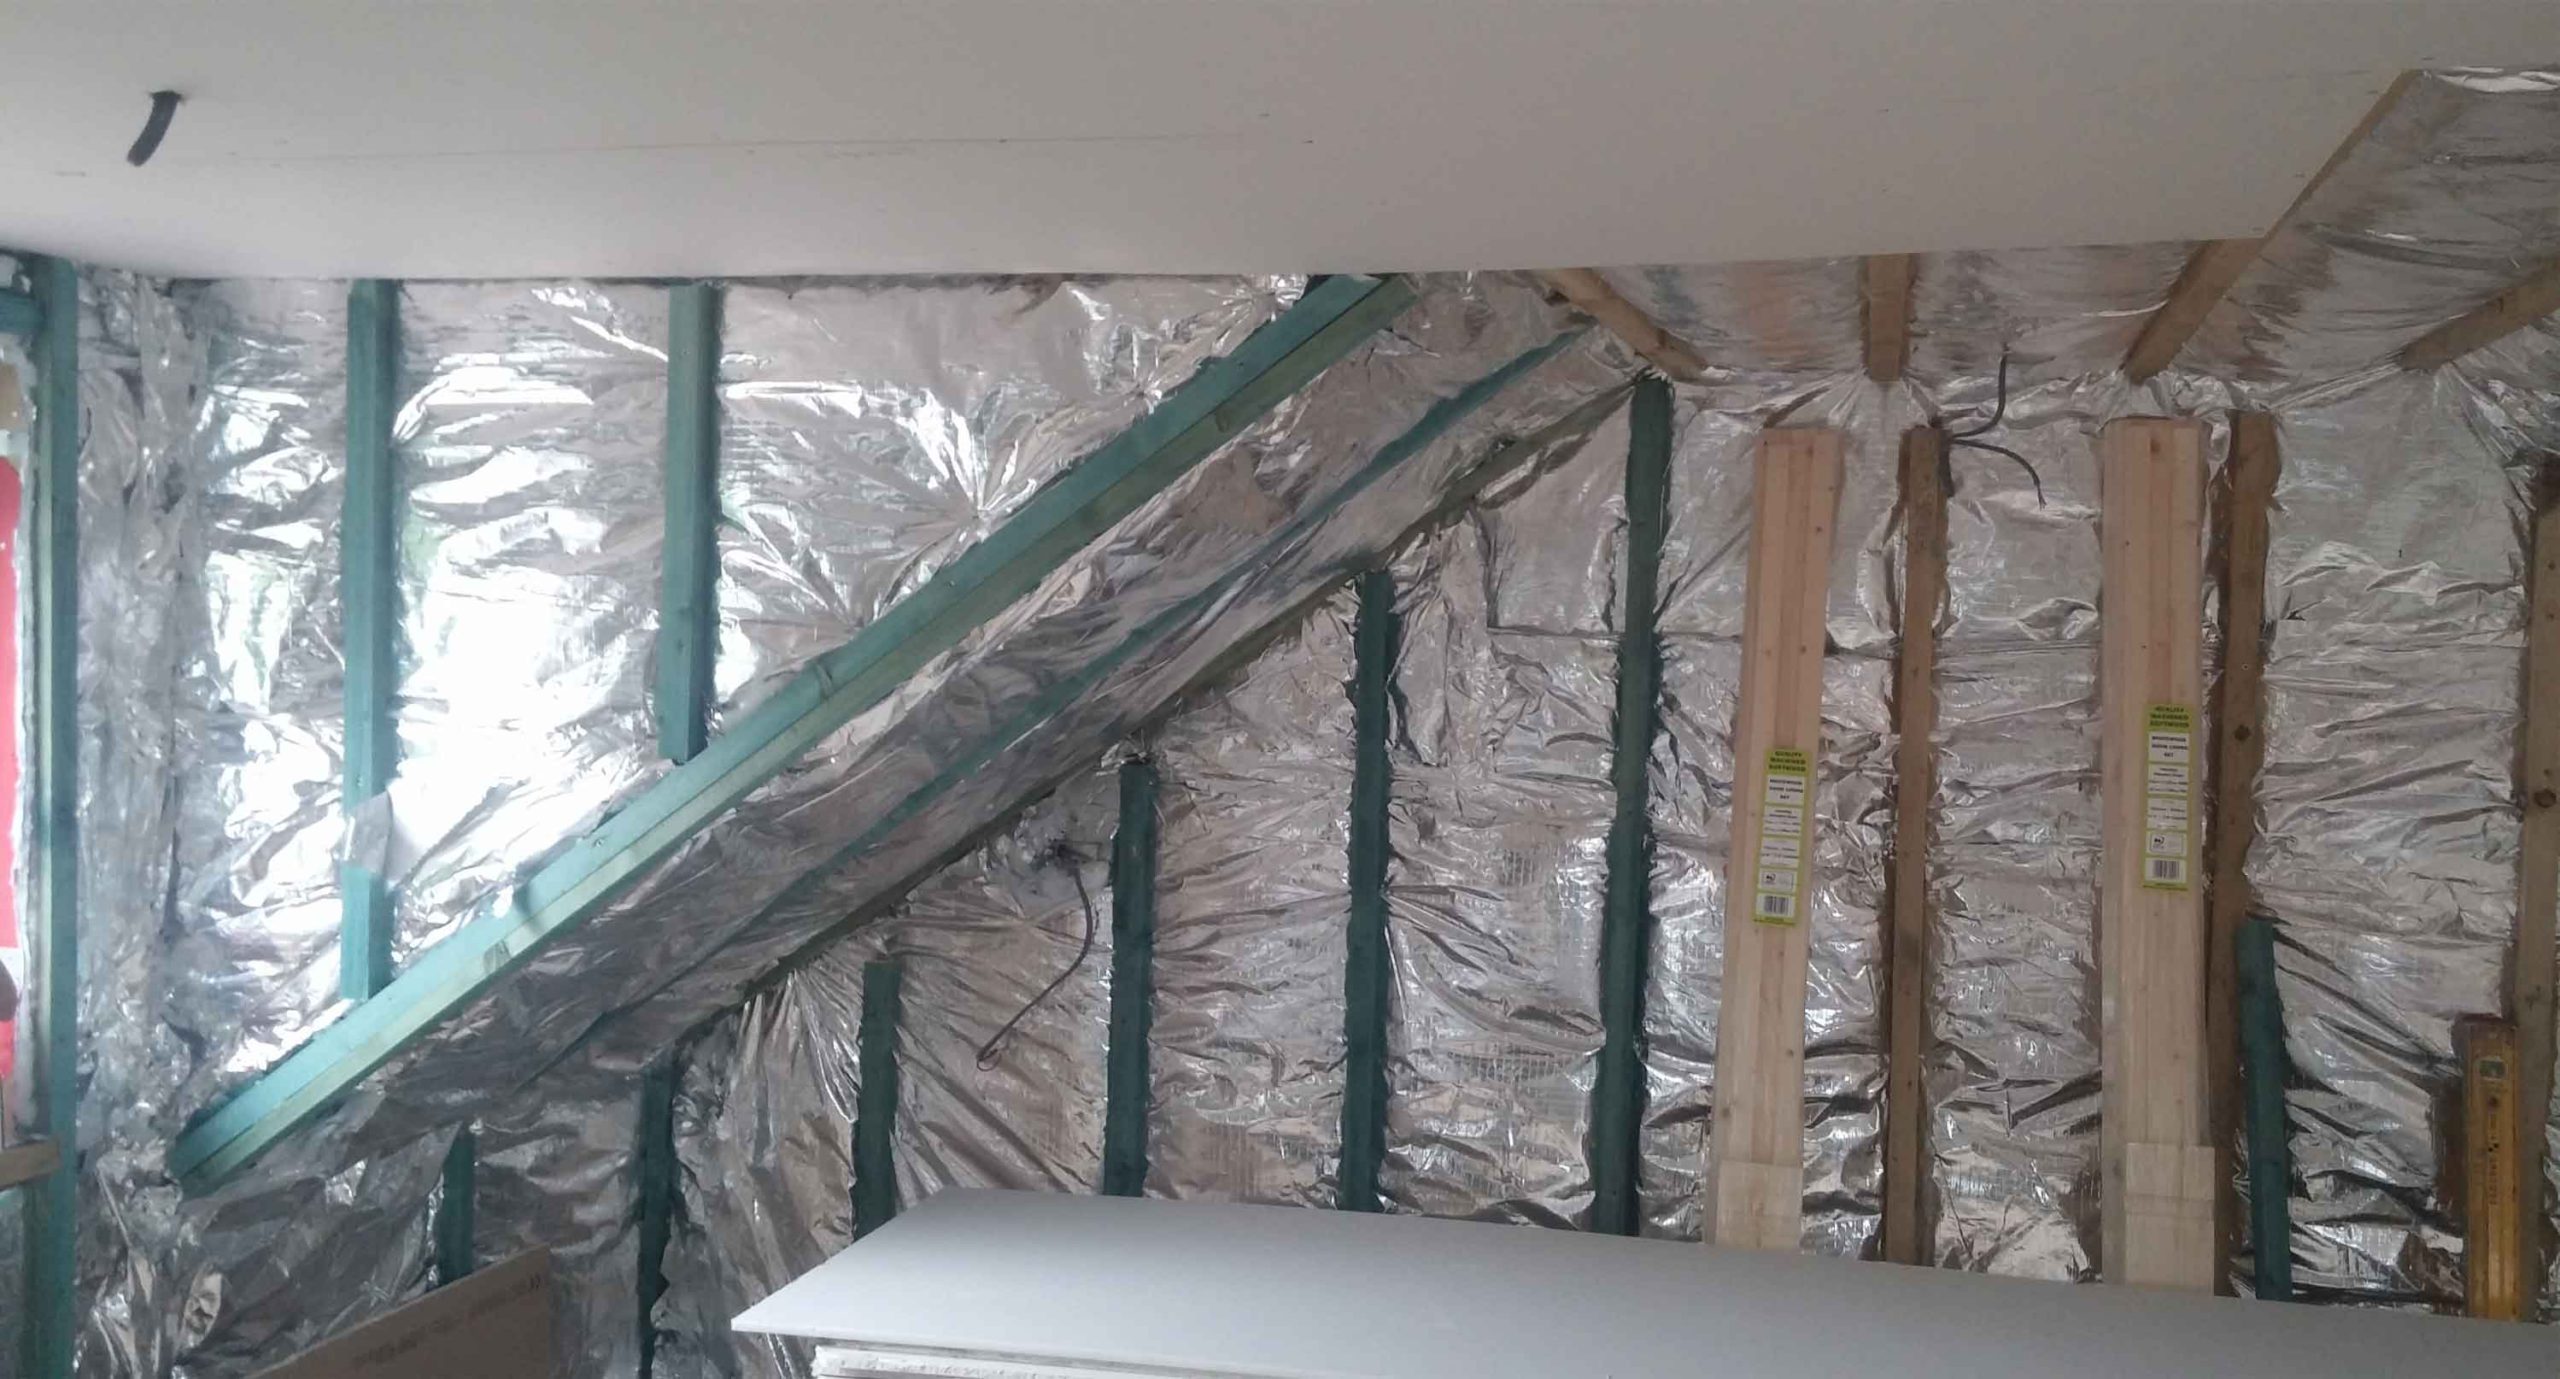 Space-blanket-over-25mm-battens-for-vapour-barrier-and-more-insulation